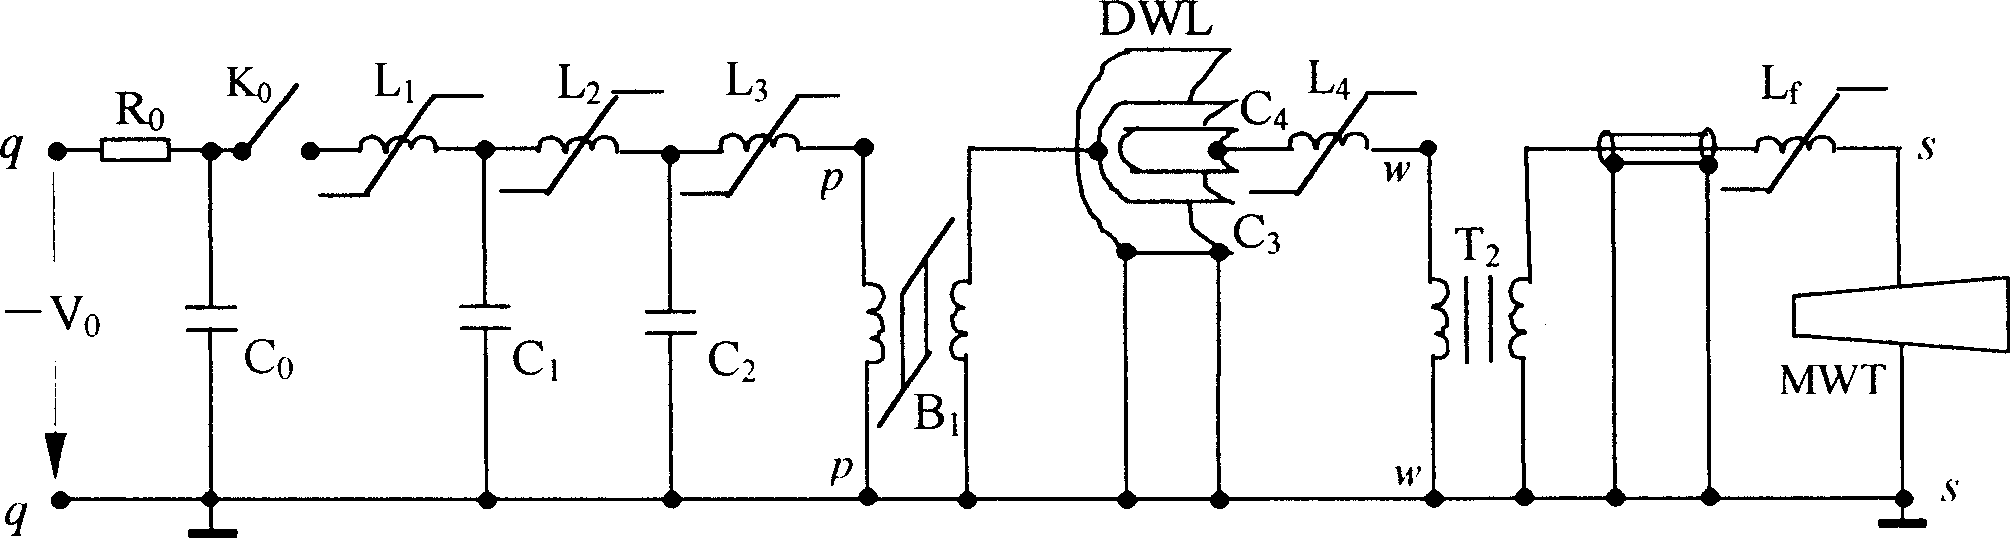 Microwave flue gas desulfurization and denitration method and apparatus